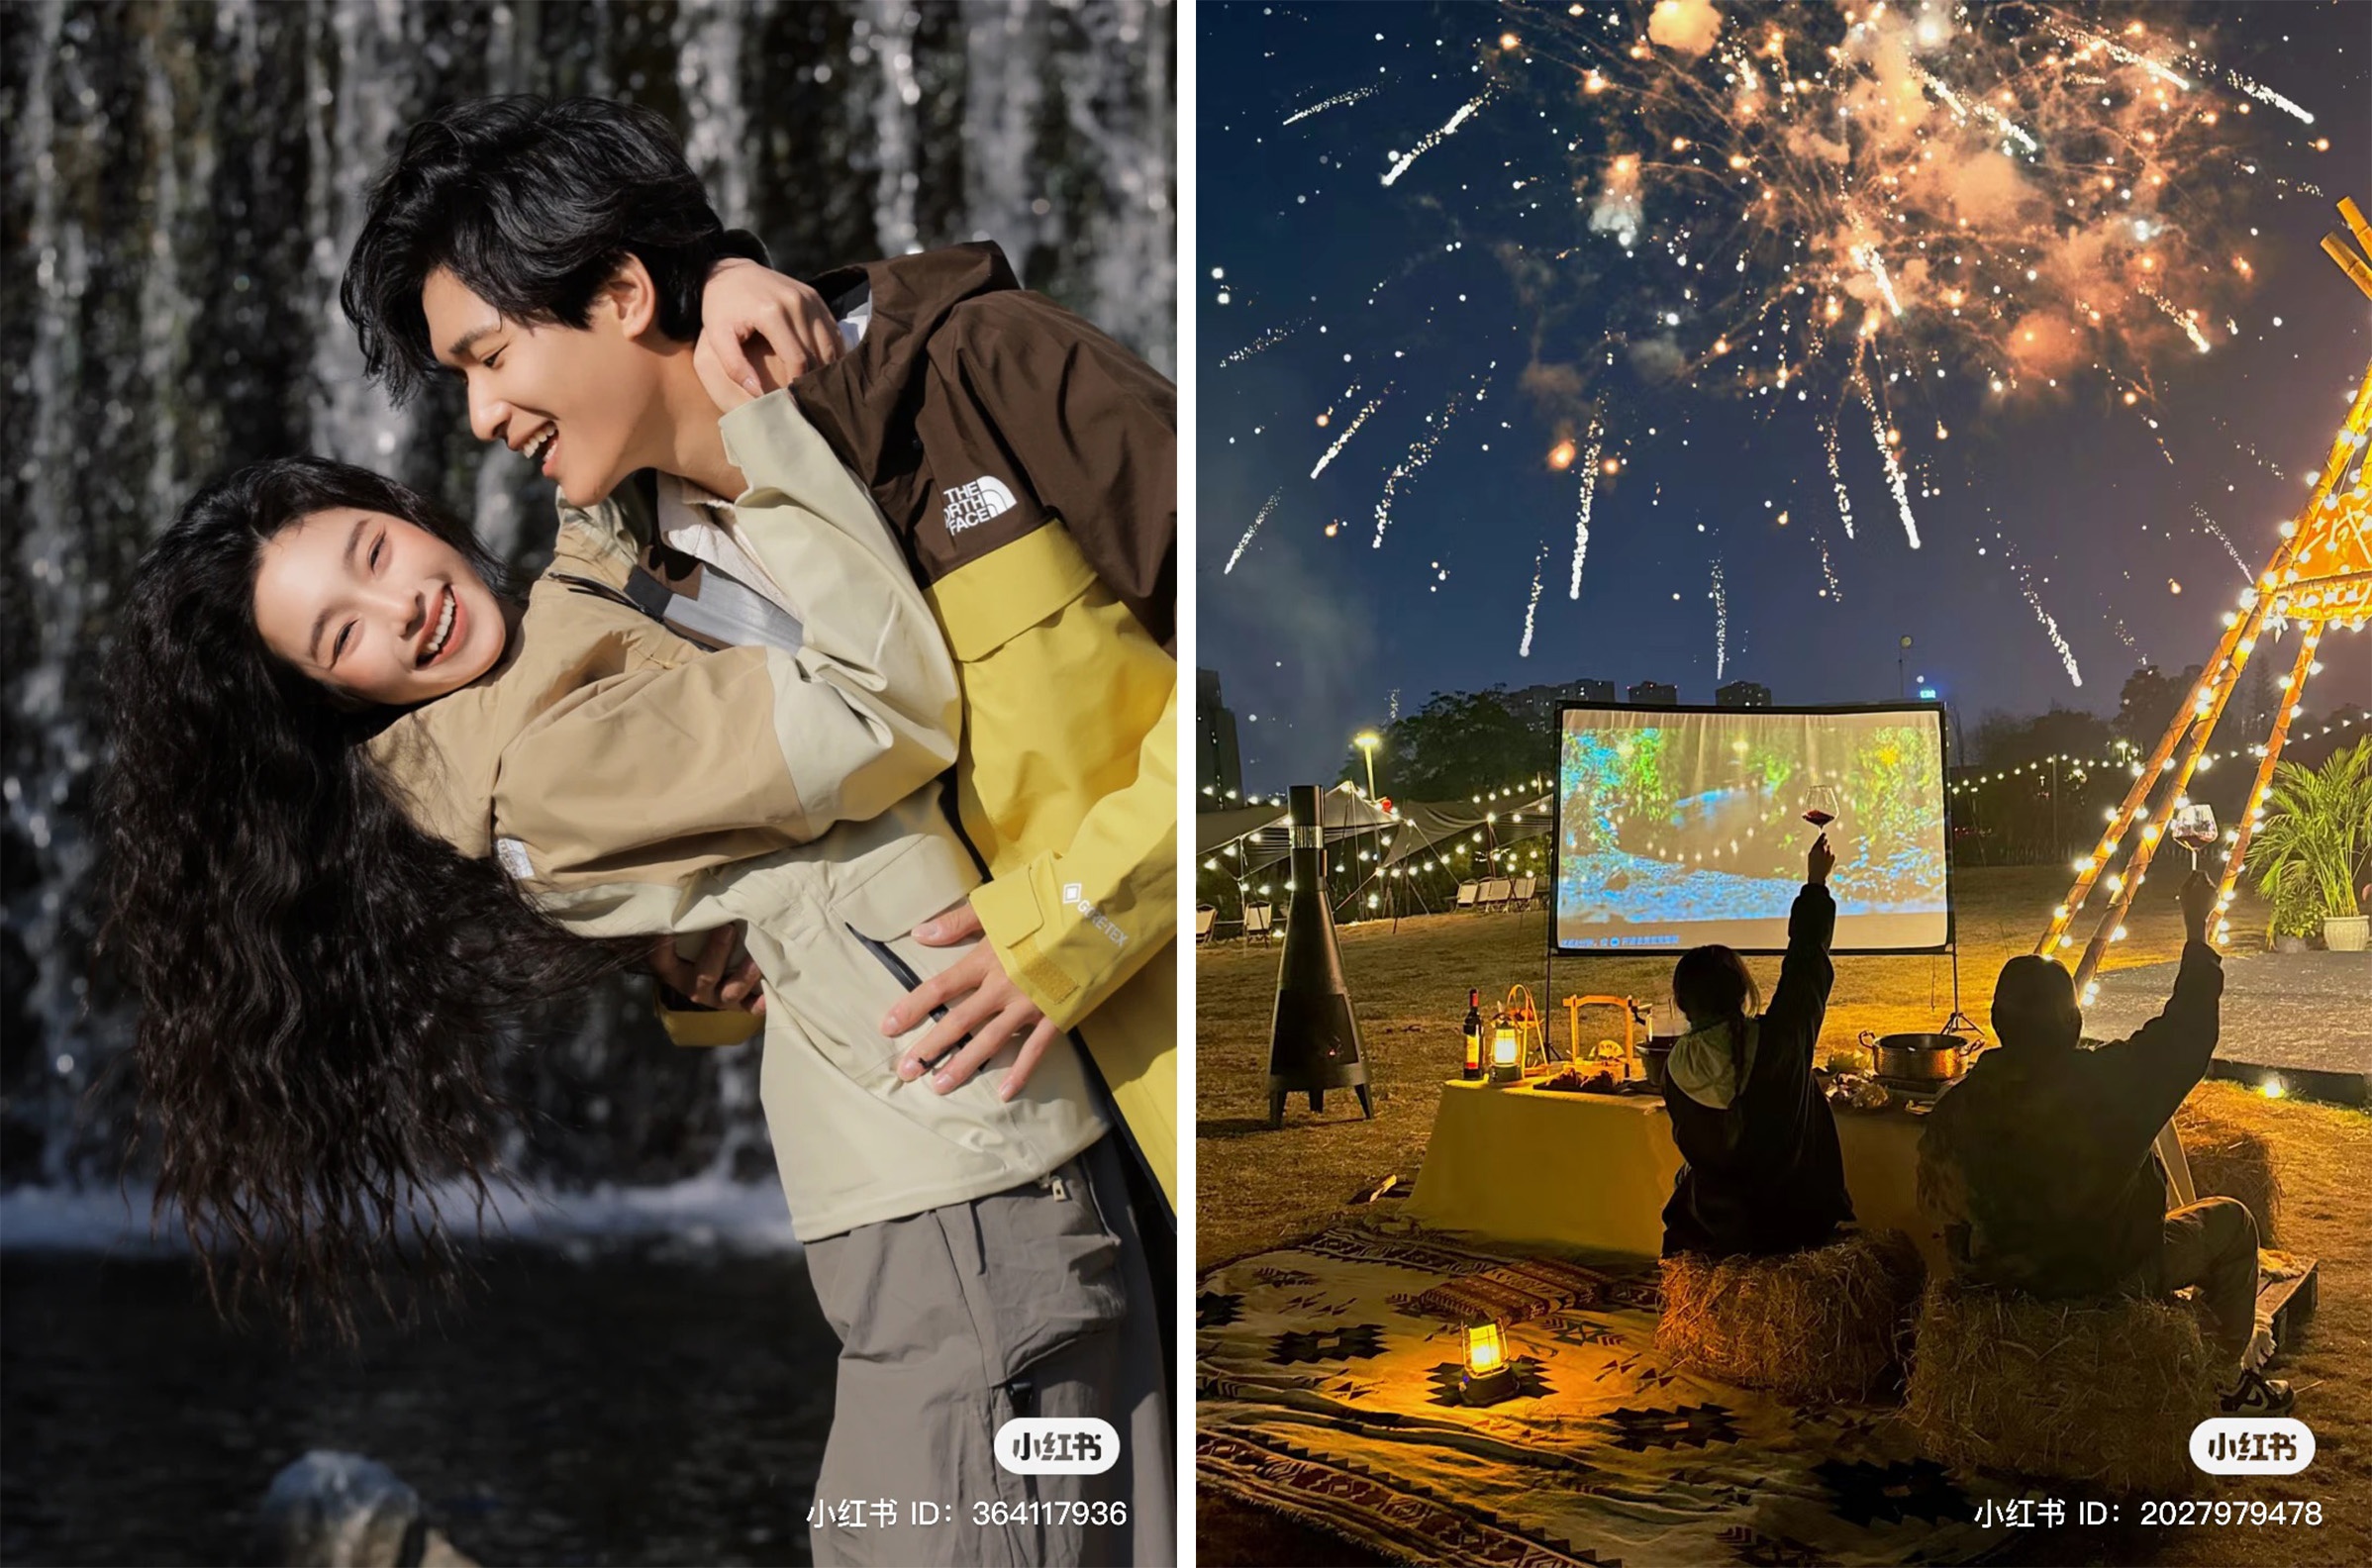 Outerwear and outdoor experiences are popular gifts this Valentine’s Day. Photo: Xiaohongshu